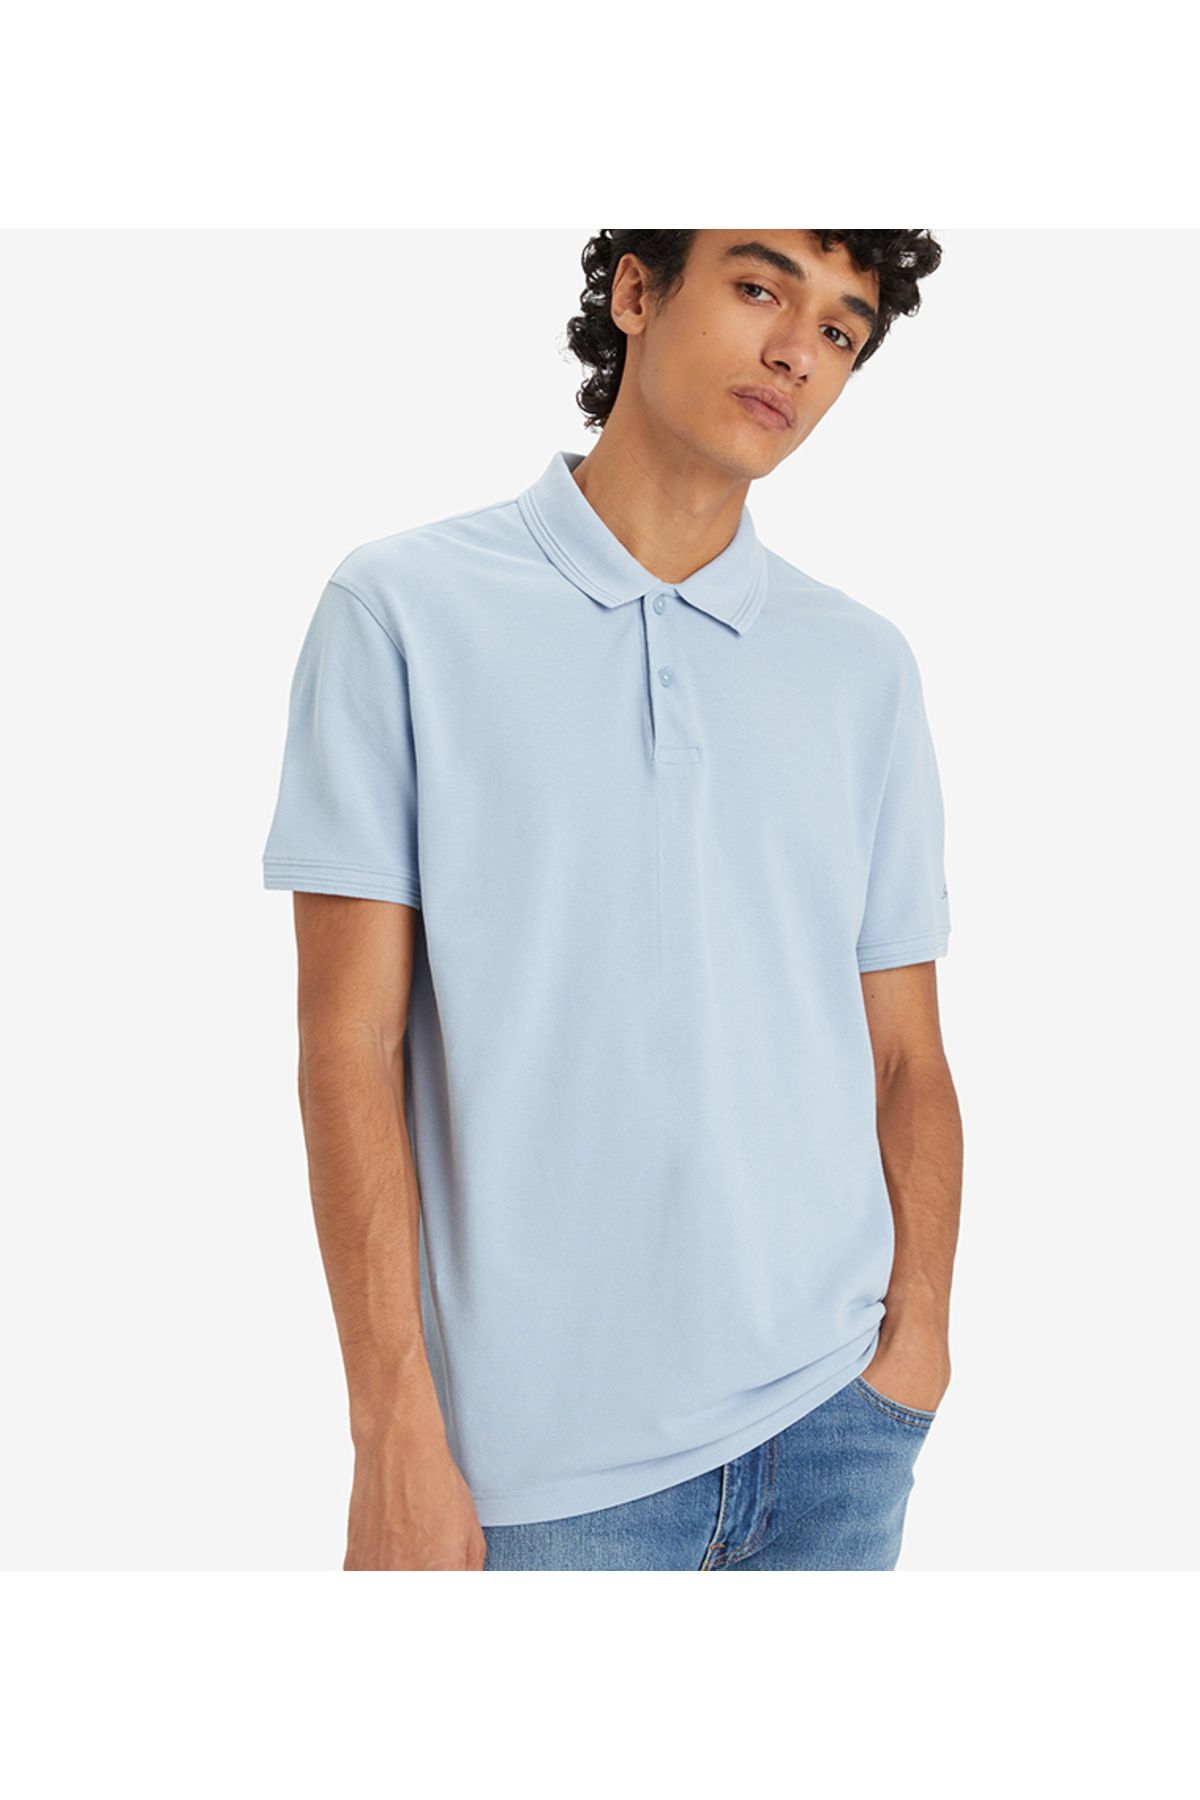 Levi's THE STANDARD POLO